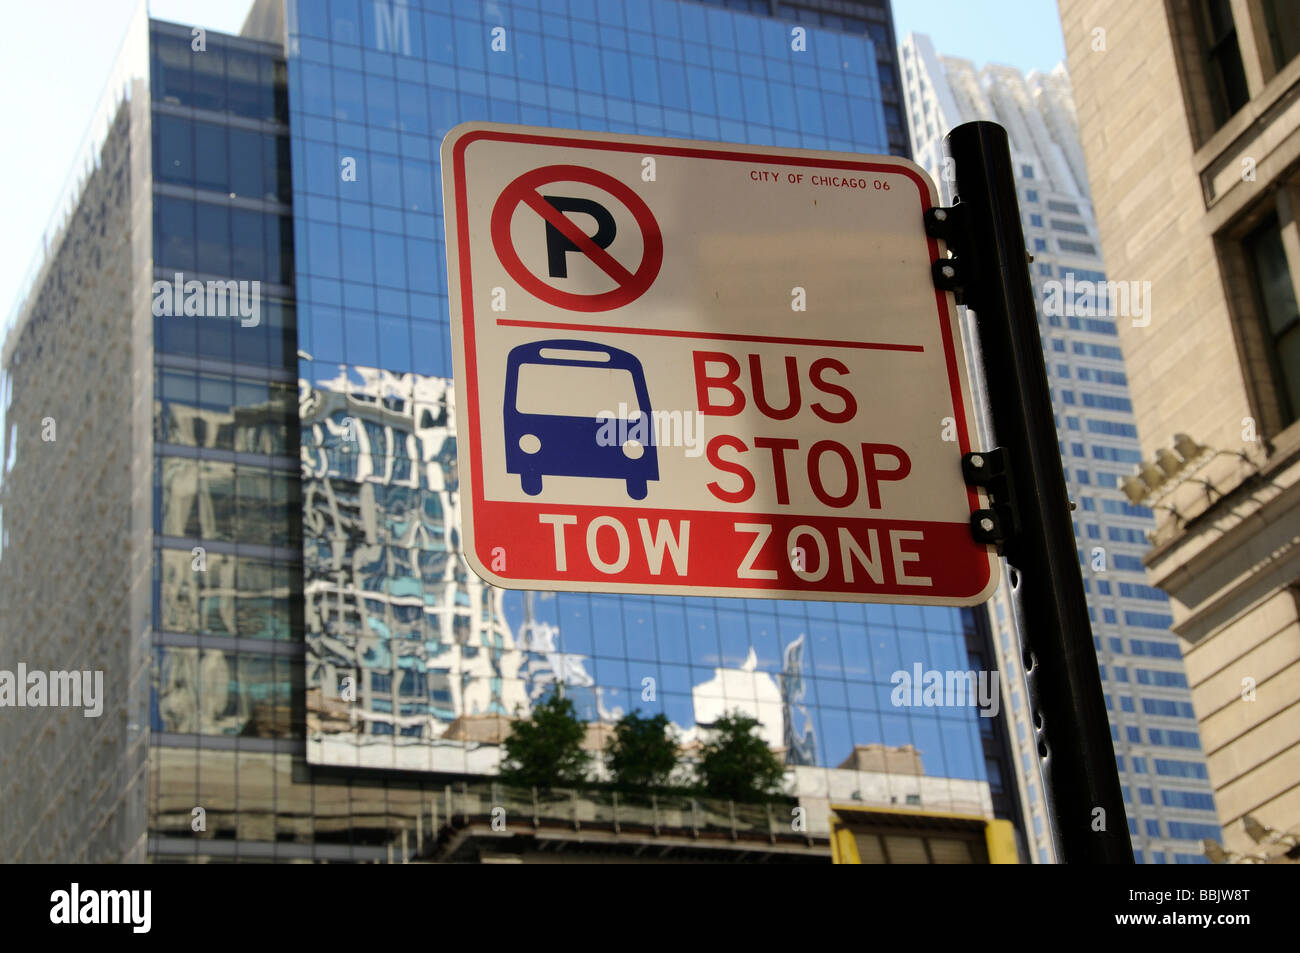 Chicago bus stop and tow away zone sign in the city center Stock Photo